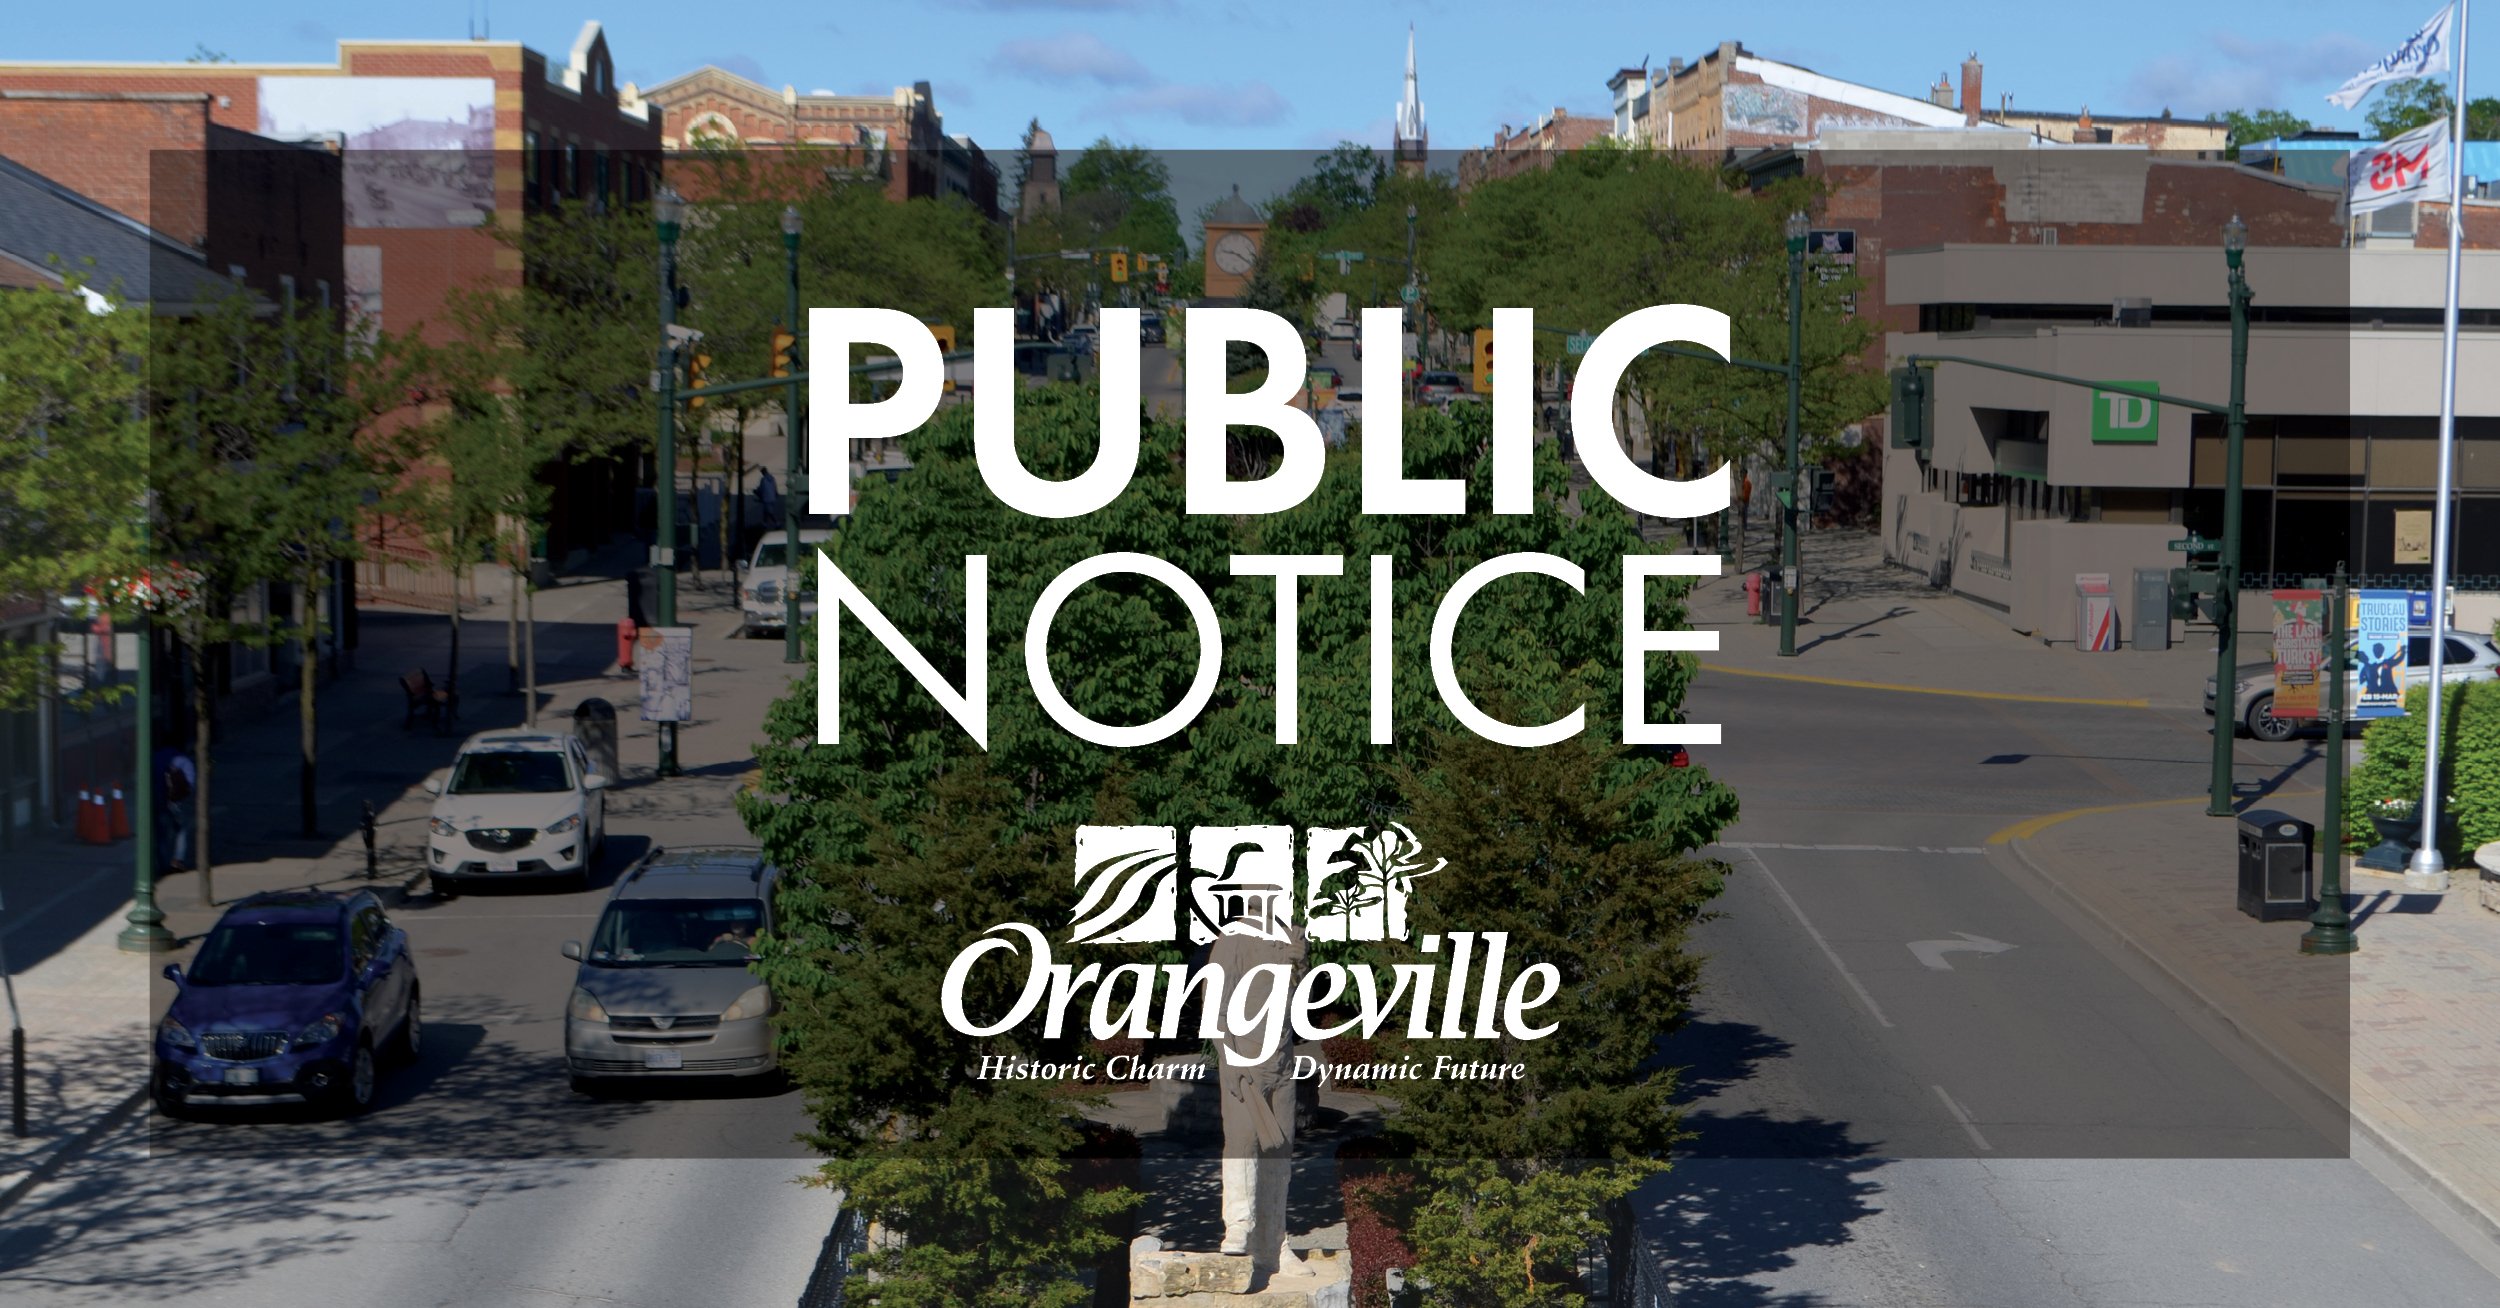 Public Notice text over photograph of street